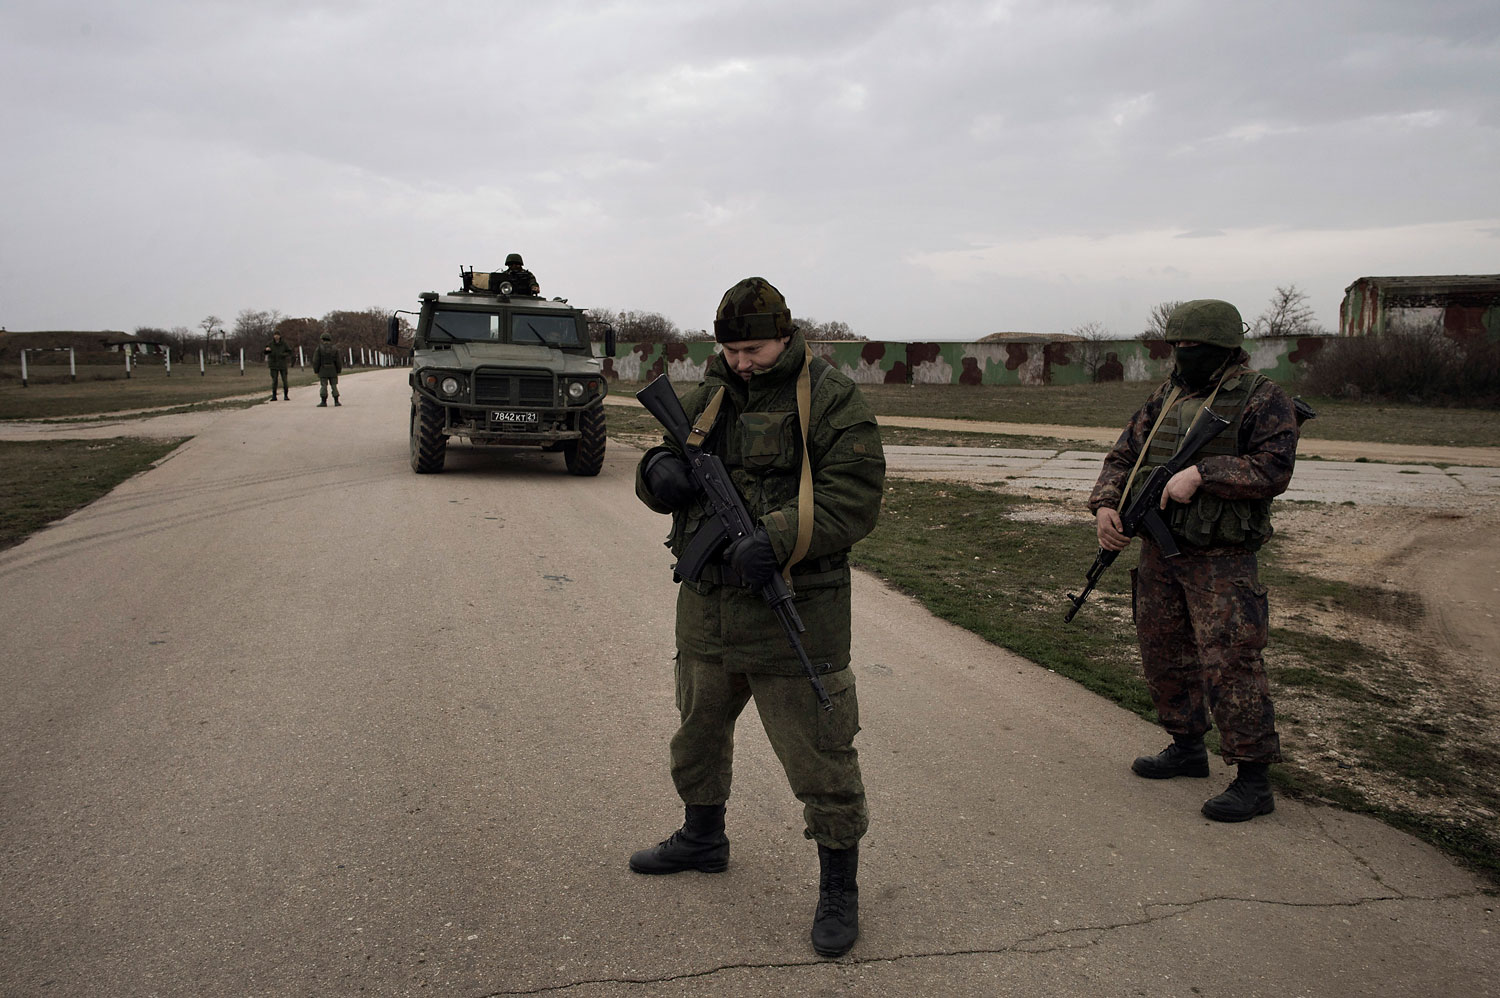 Russian soldiers at the contested Belbek airfield in Crimea on March 4, 2014 (Yuri Kozyrev—NOOR for TIME)